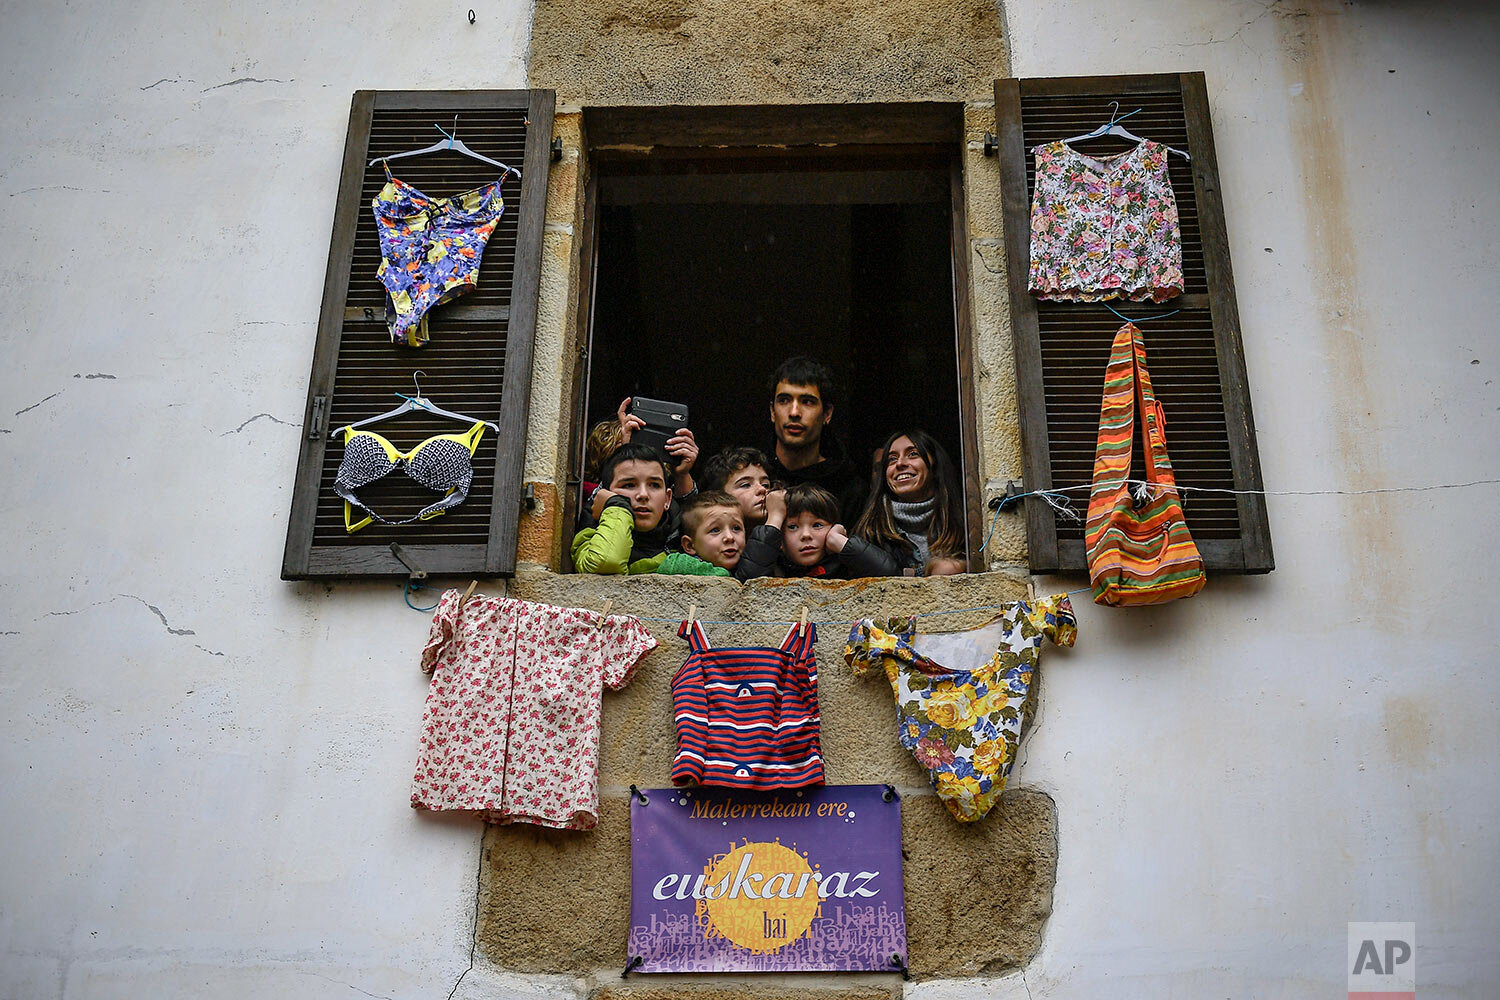  In this Monday, Jan. 27, 2020 photo, residents look from a window as ''Joaldunaks'' march along the street taking part in a Carnival in the small Pyrenees village of Ituren, northern Spain.  (AP Photo/Alvaro Barrientos) 